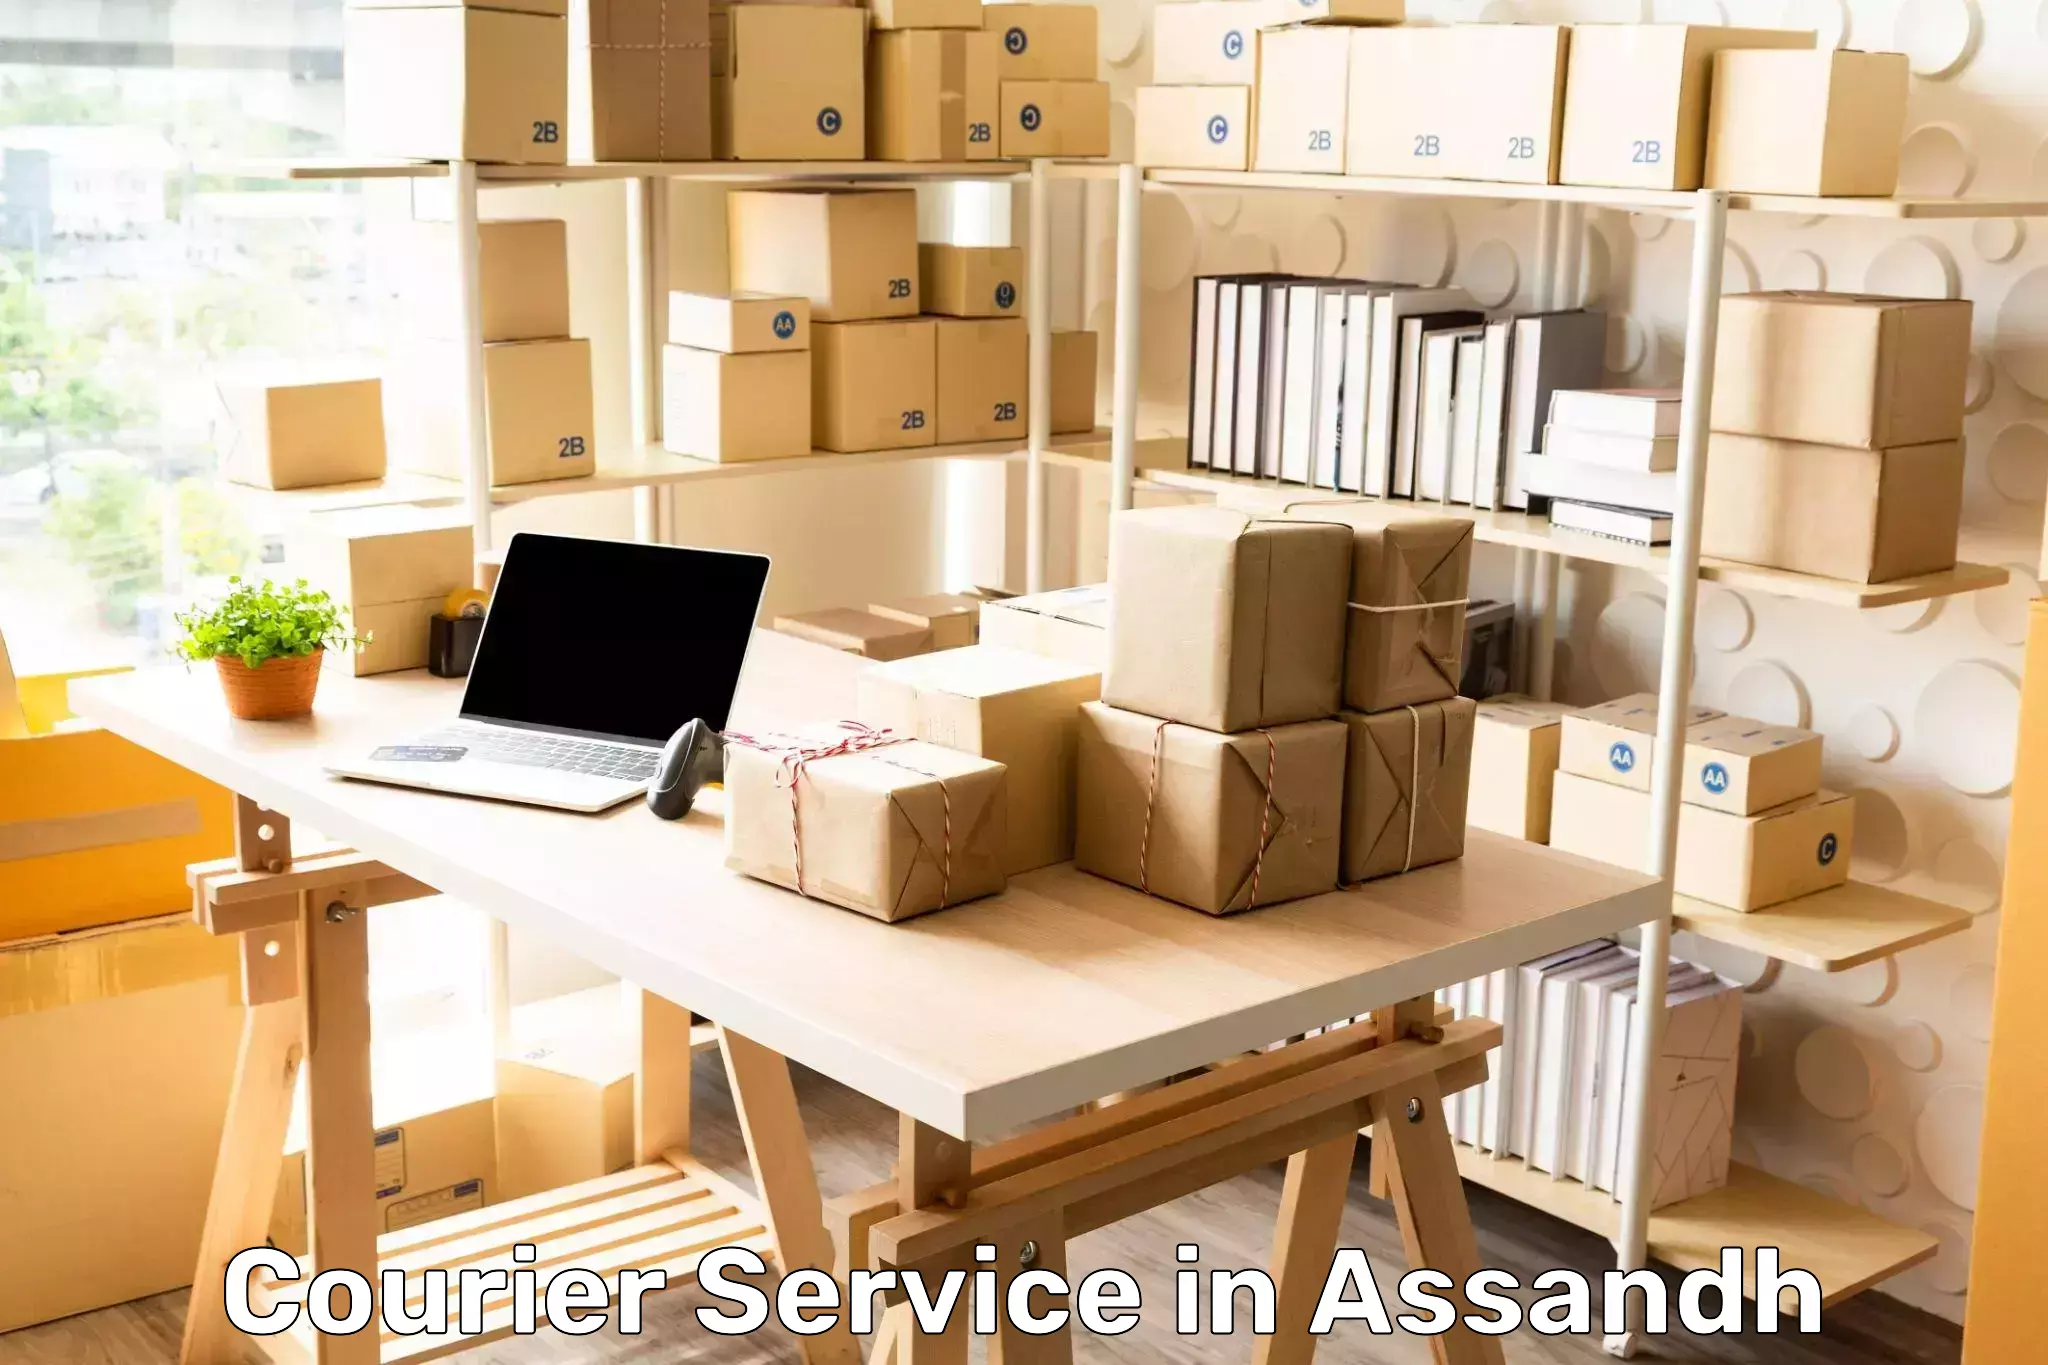 Custom shipping services in Assandh